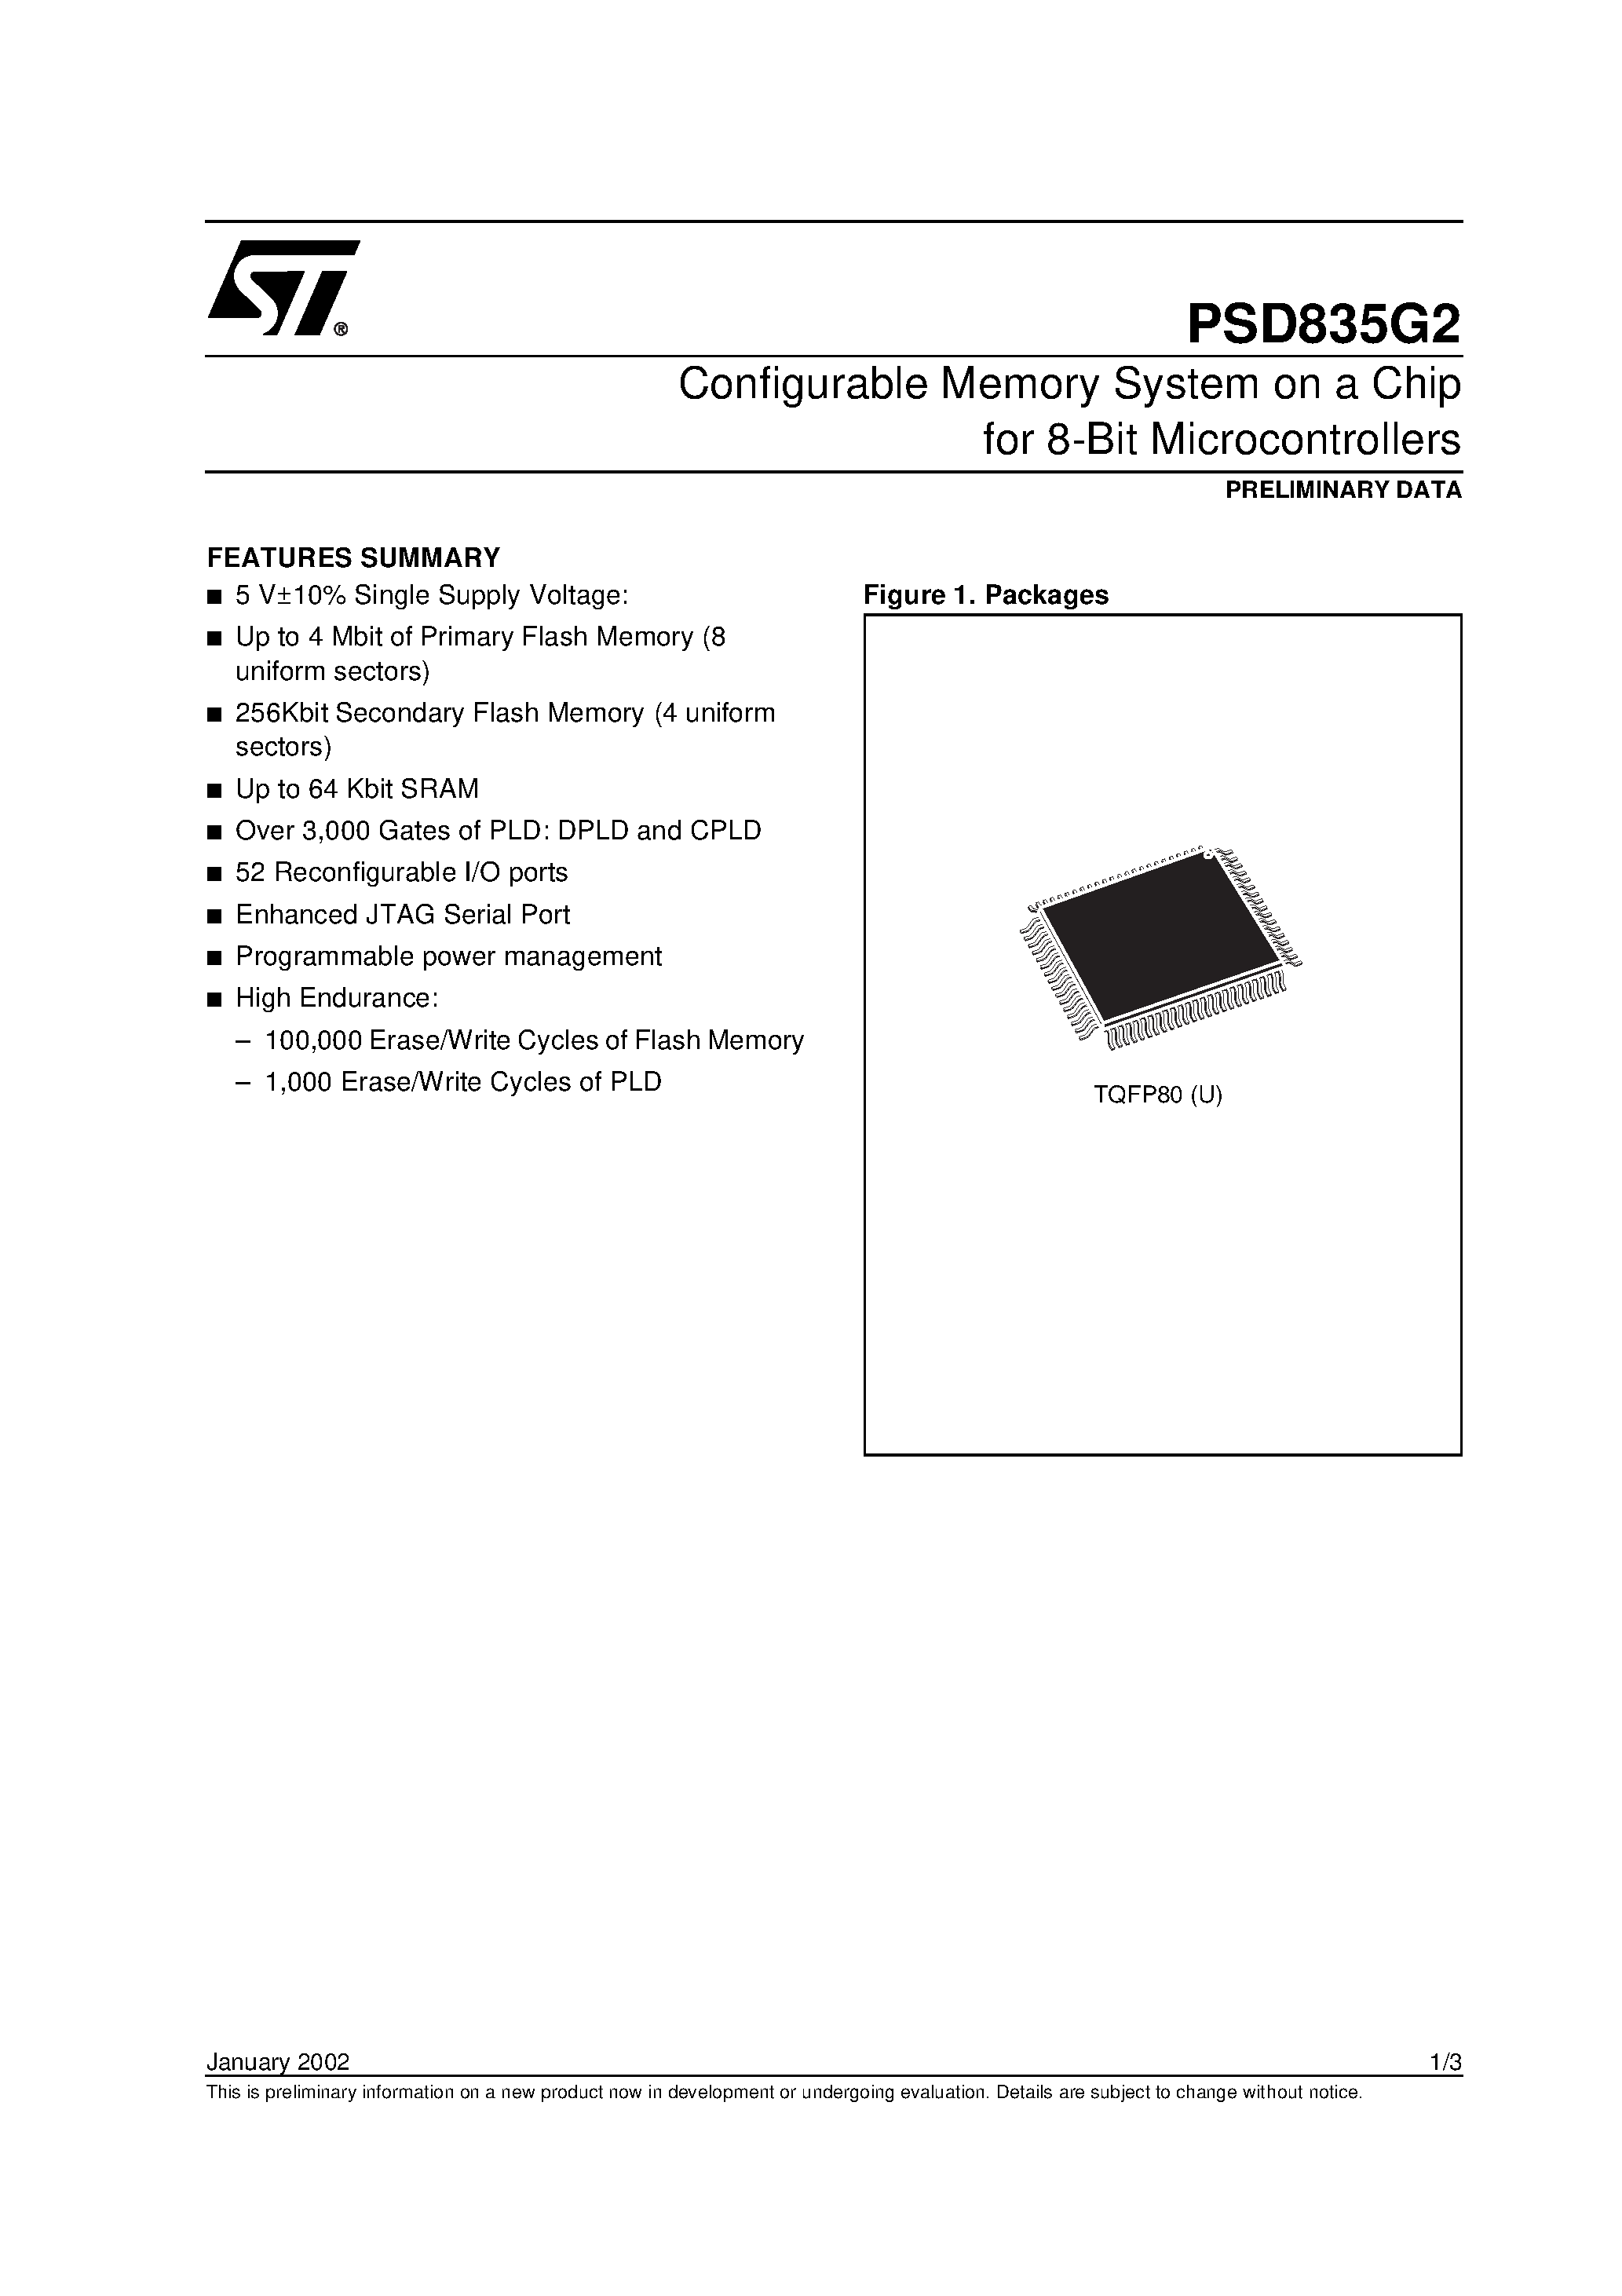 Datasheet PSD835F2-A-15M - Configurable Memory System on a Chip for 8-Bit Microcontrollers page 1